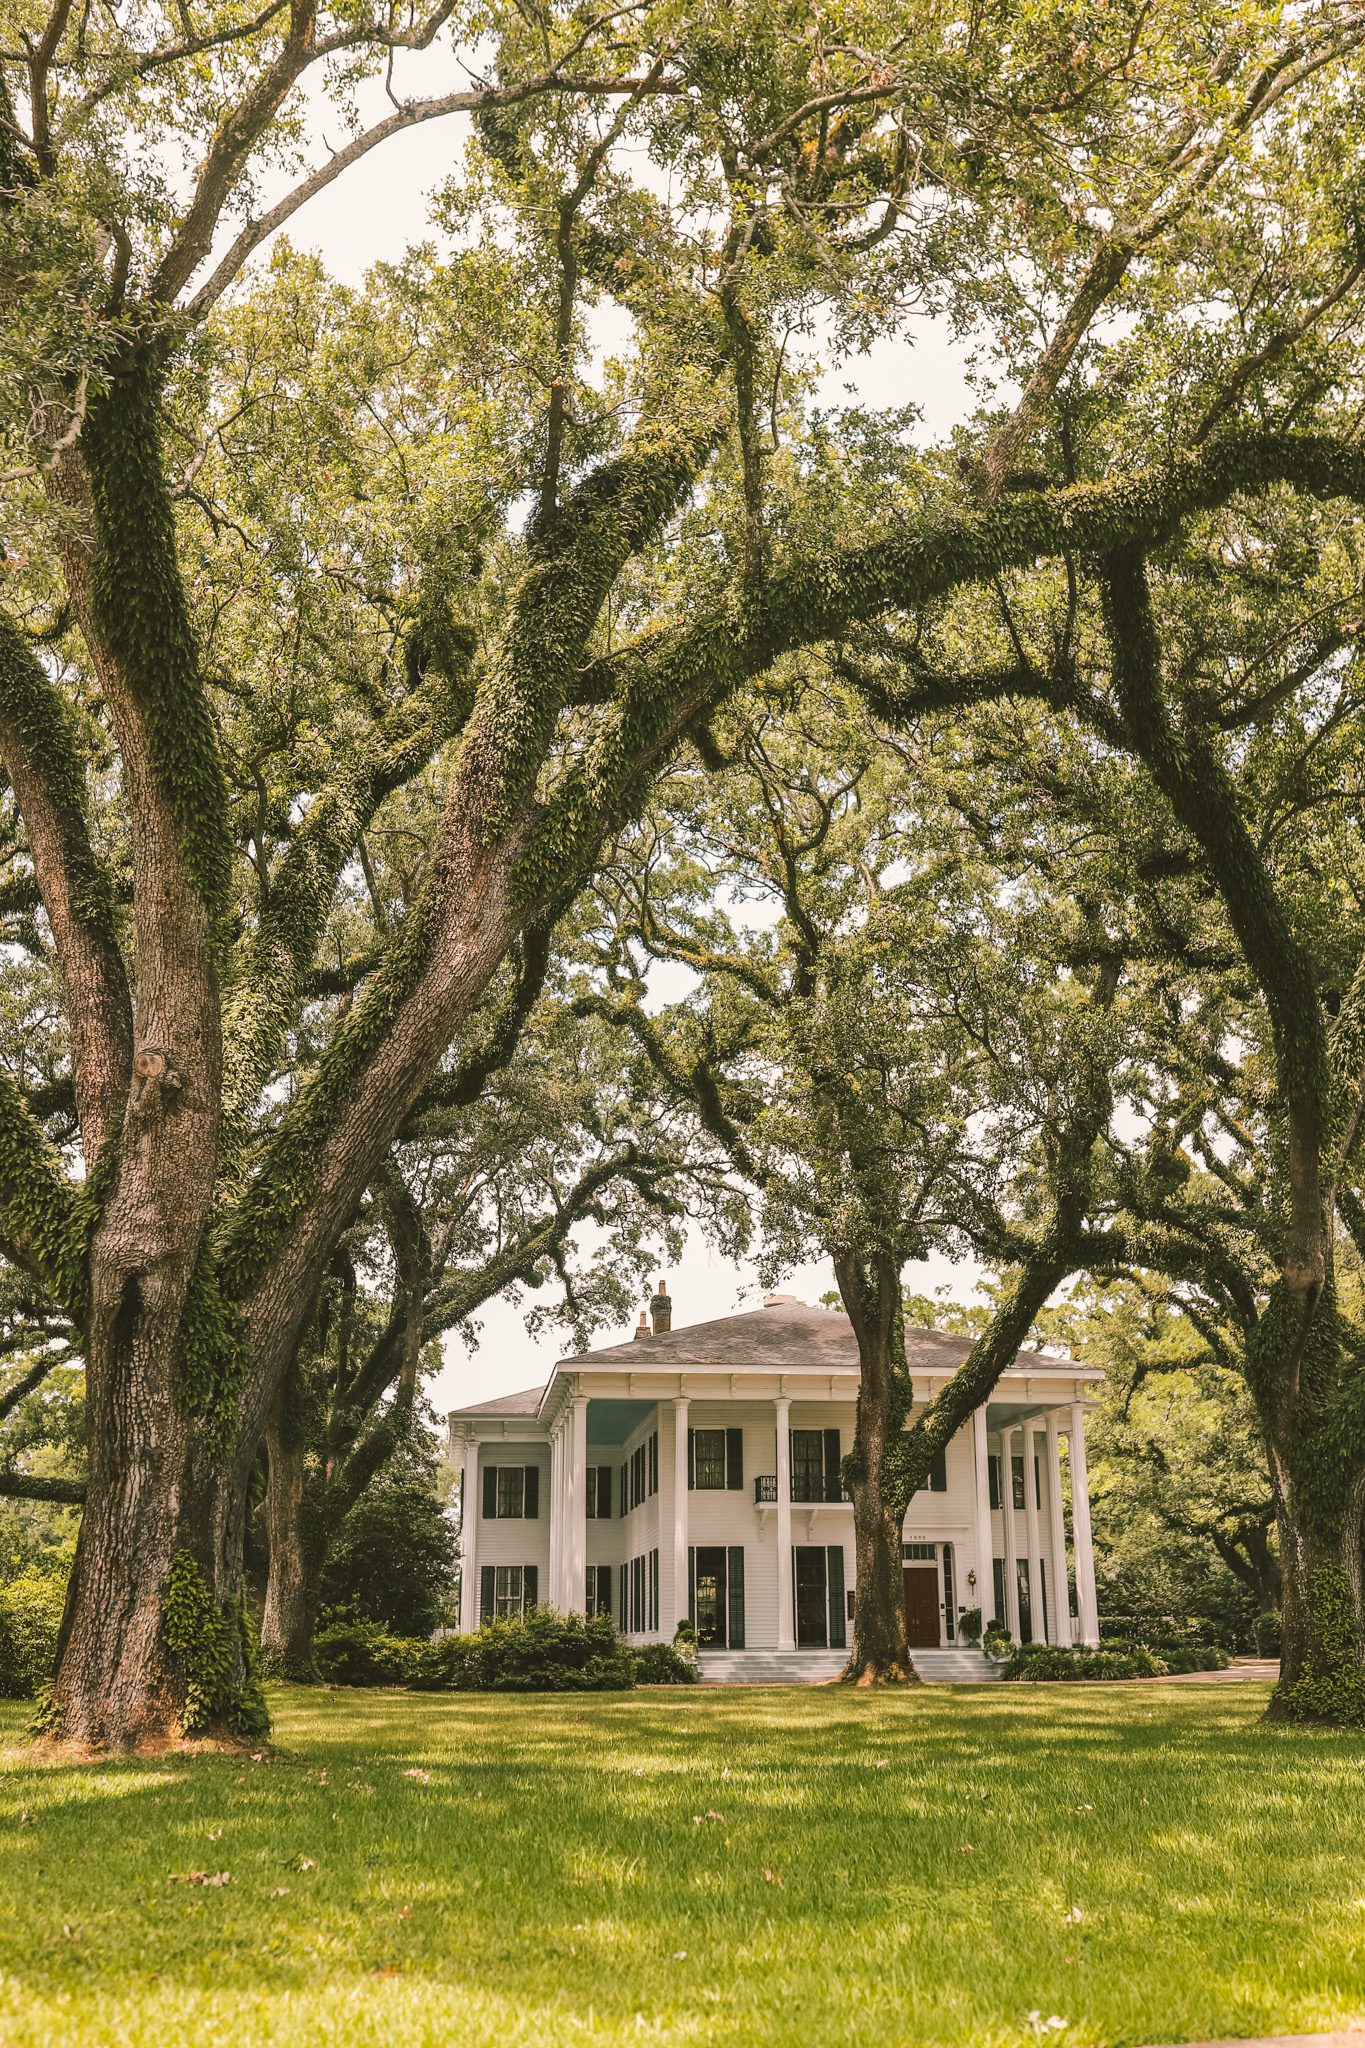 11 Things to do in Mobile, Alabama | Simply Wander